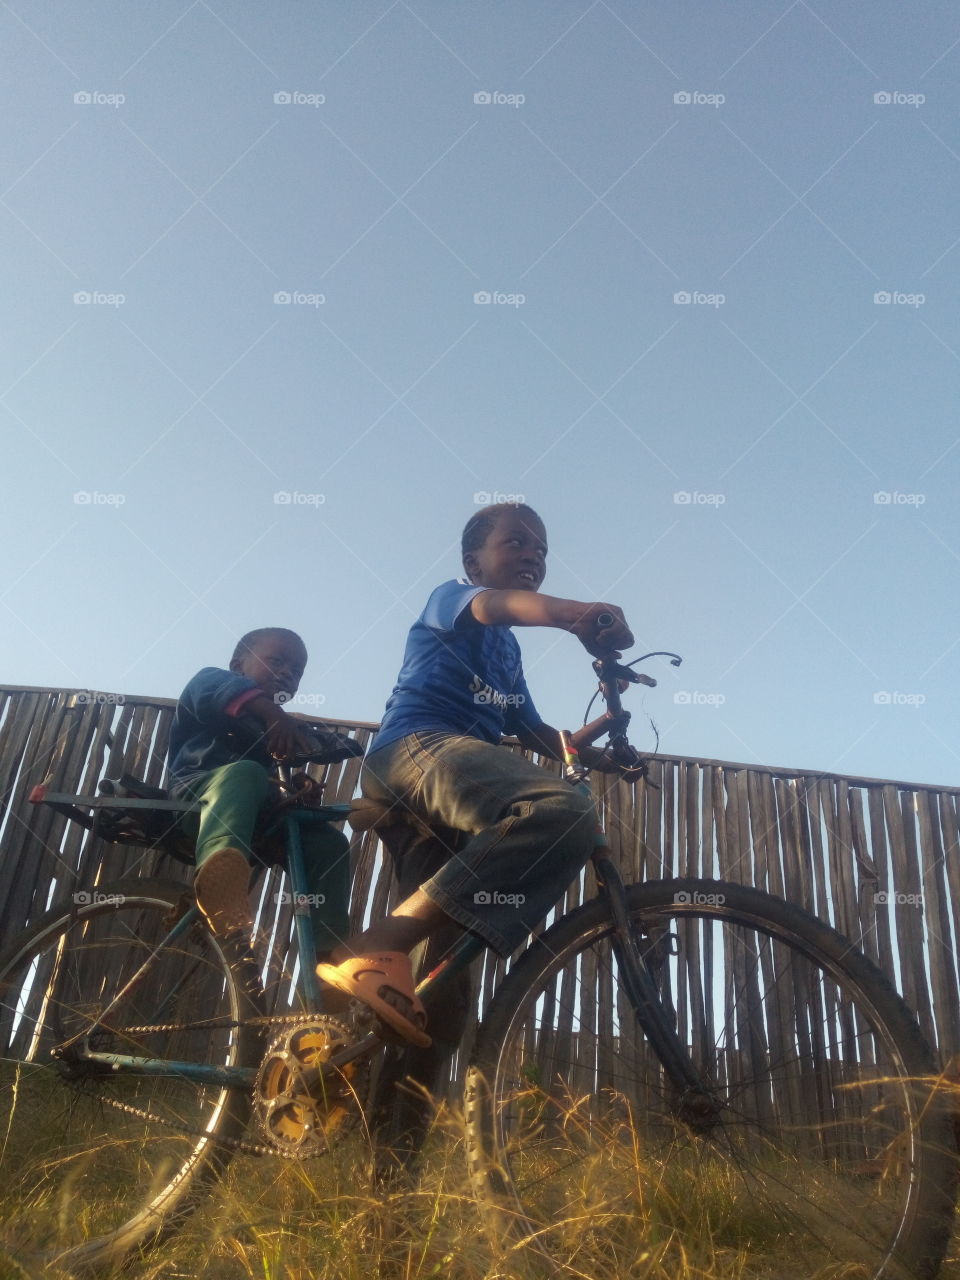 Two African boys riding on a bicycle.